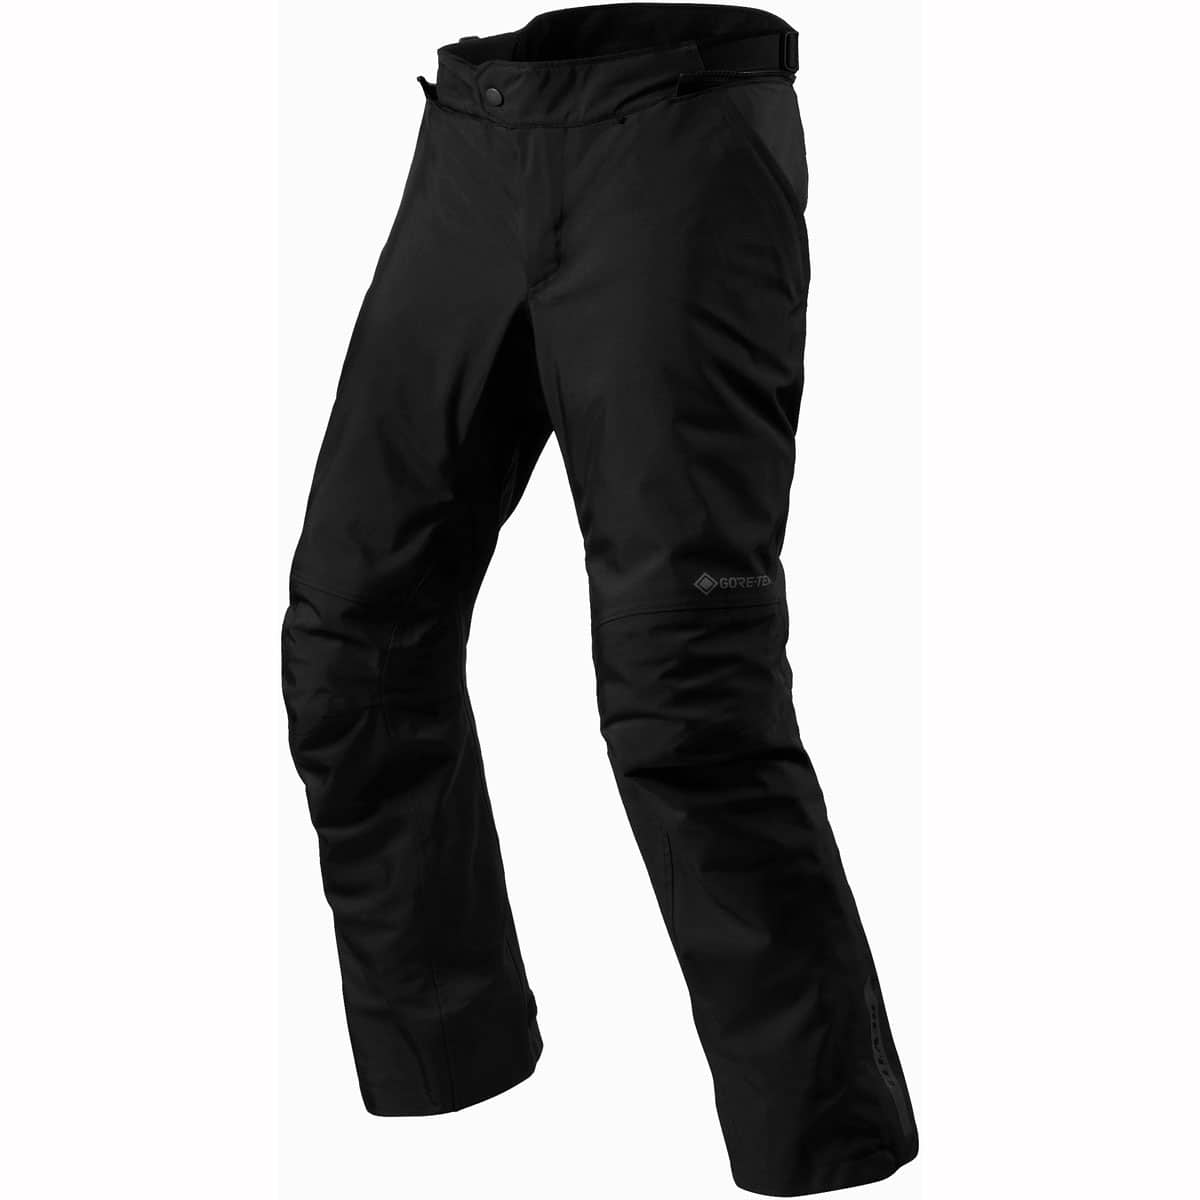 Get ready to take on any type of weather with the versatile Revit Vertical Goretex motorcycle trousers